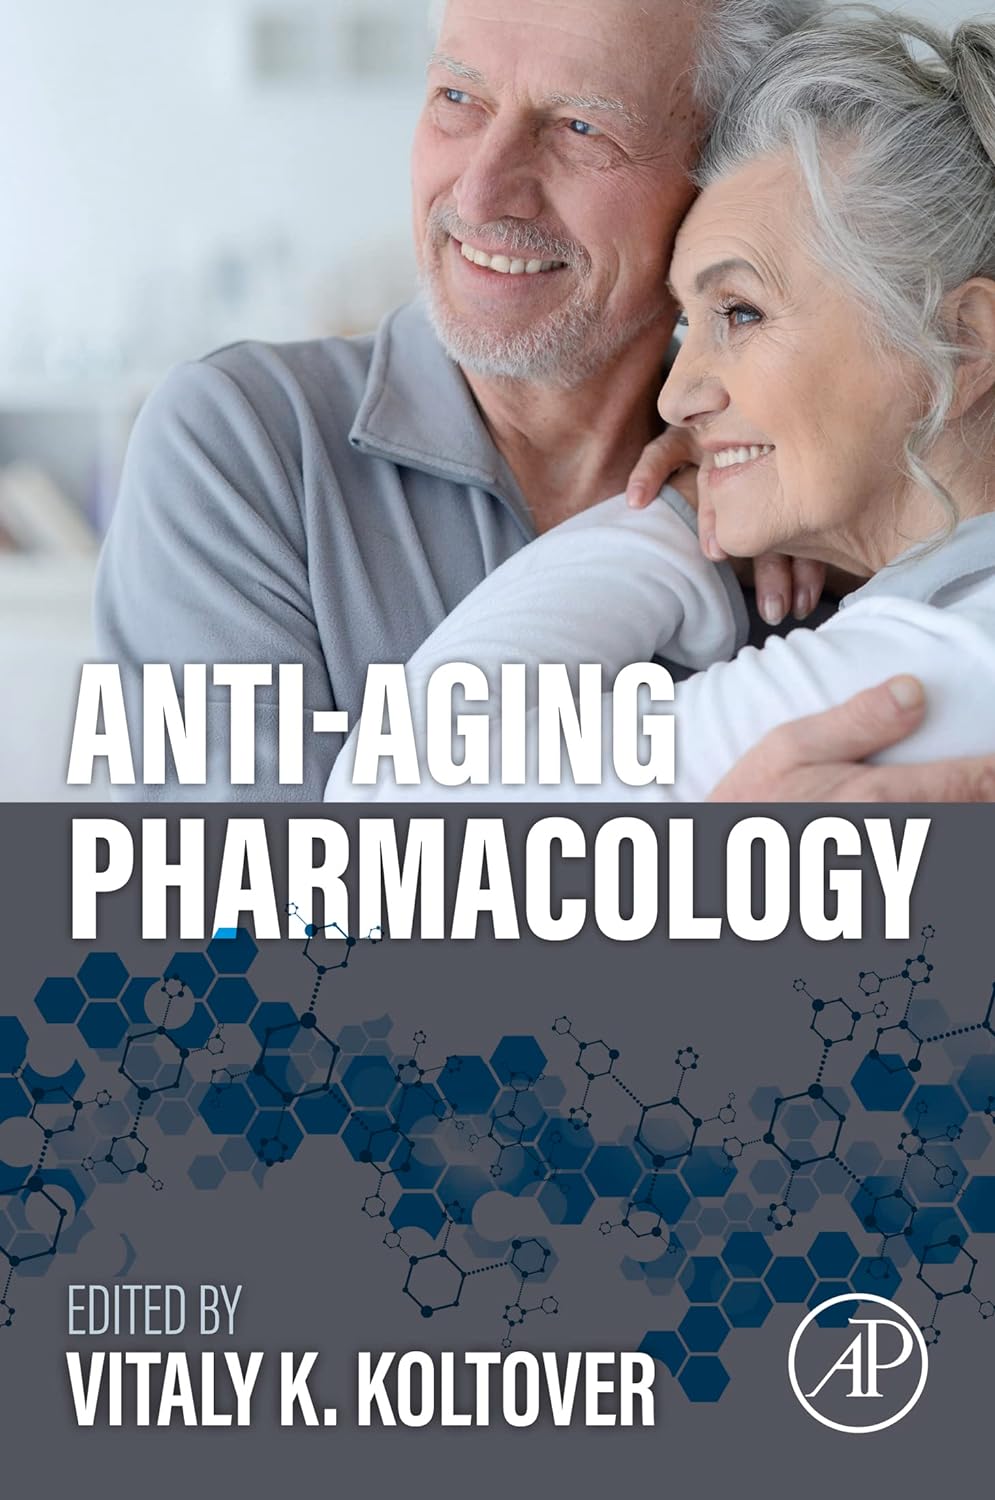 Anti-Aging Pharmacology by Vitaly Koltover